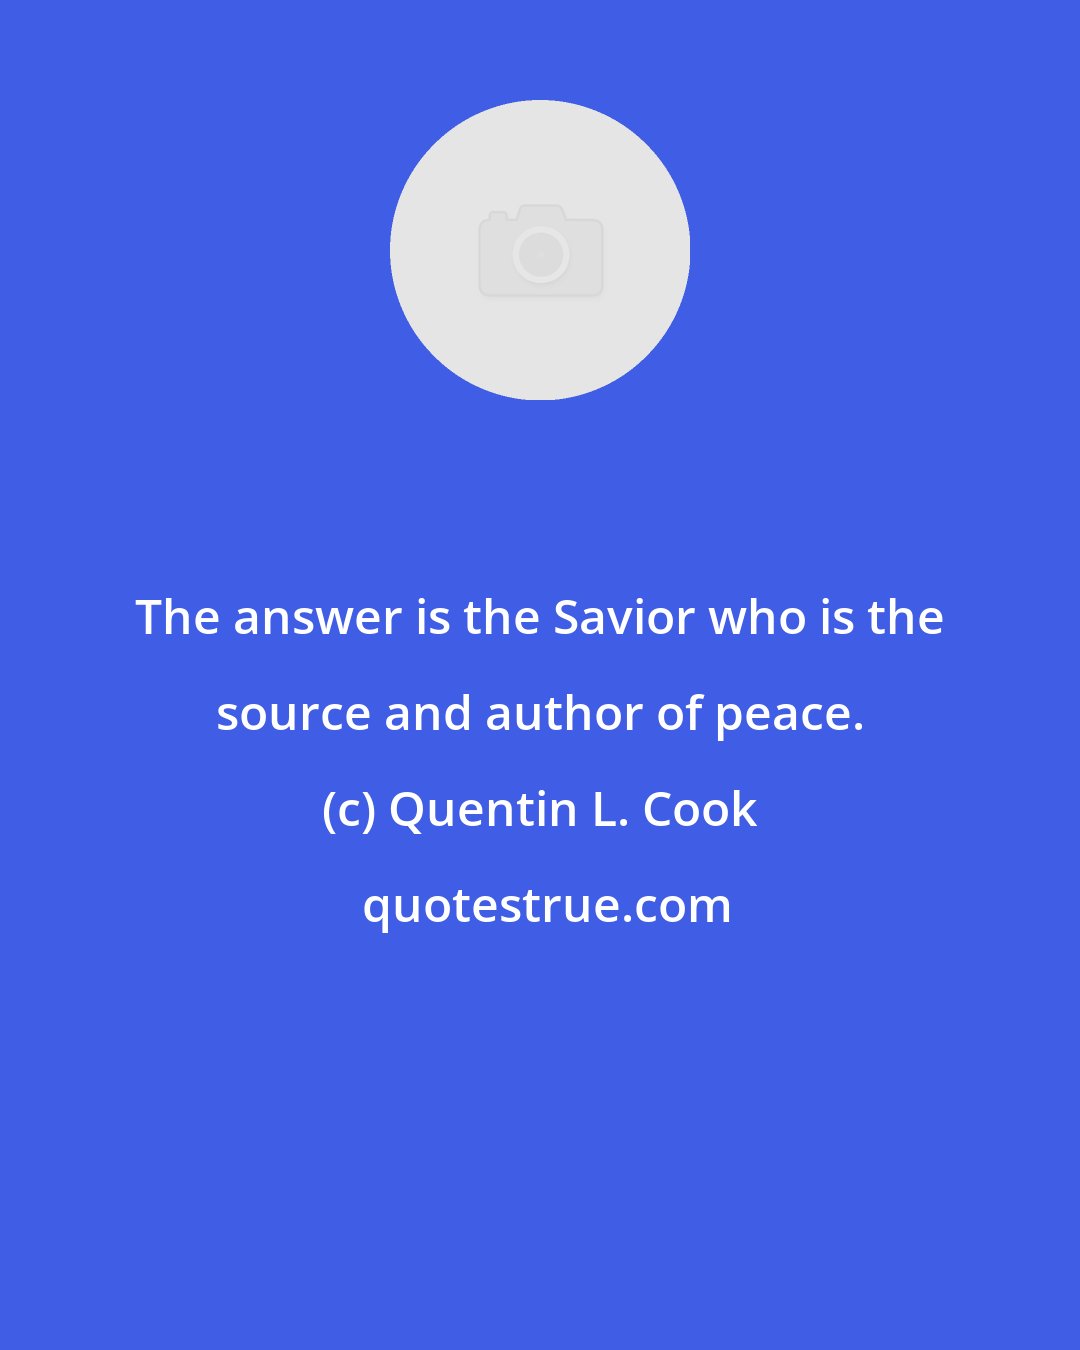 Quentin L. Cook: The answer is the Savior who is the source and author of peace.